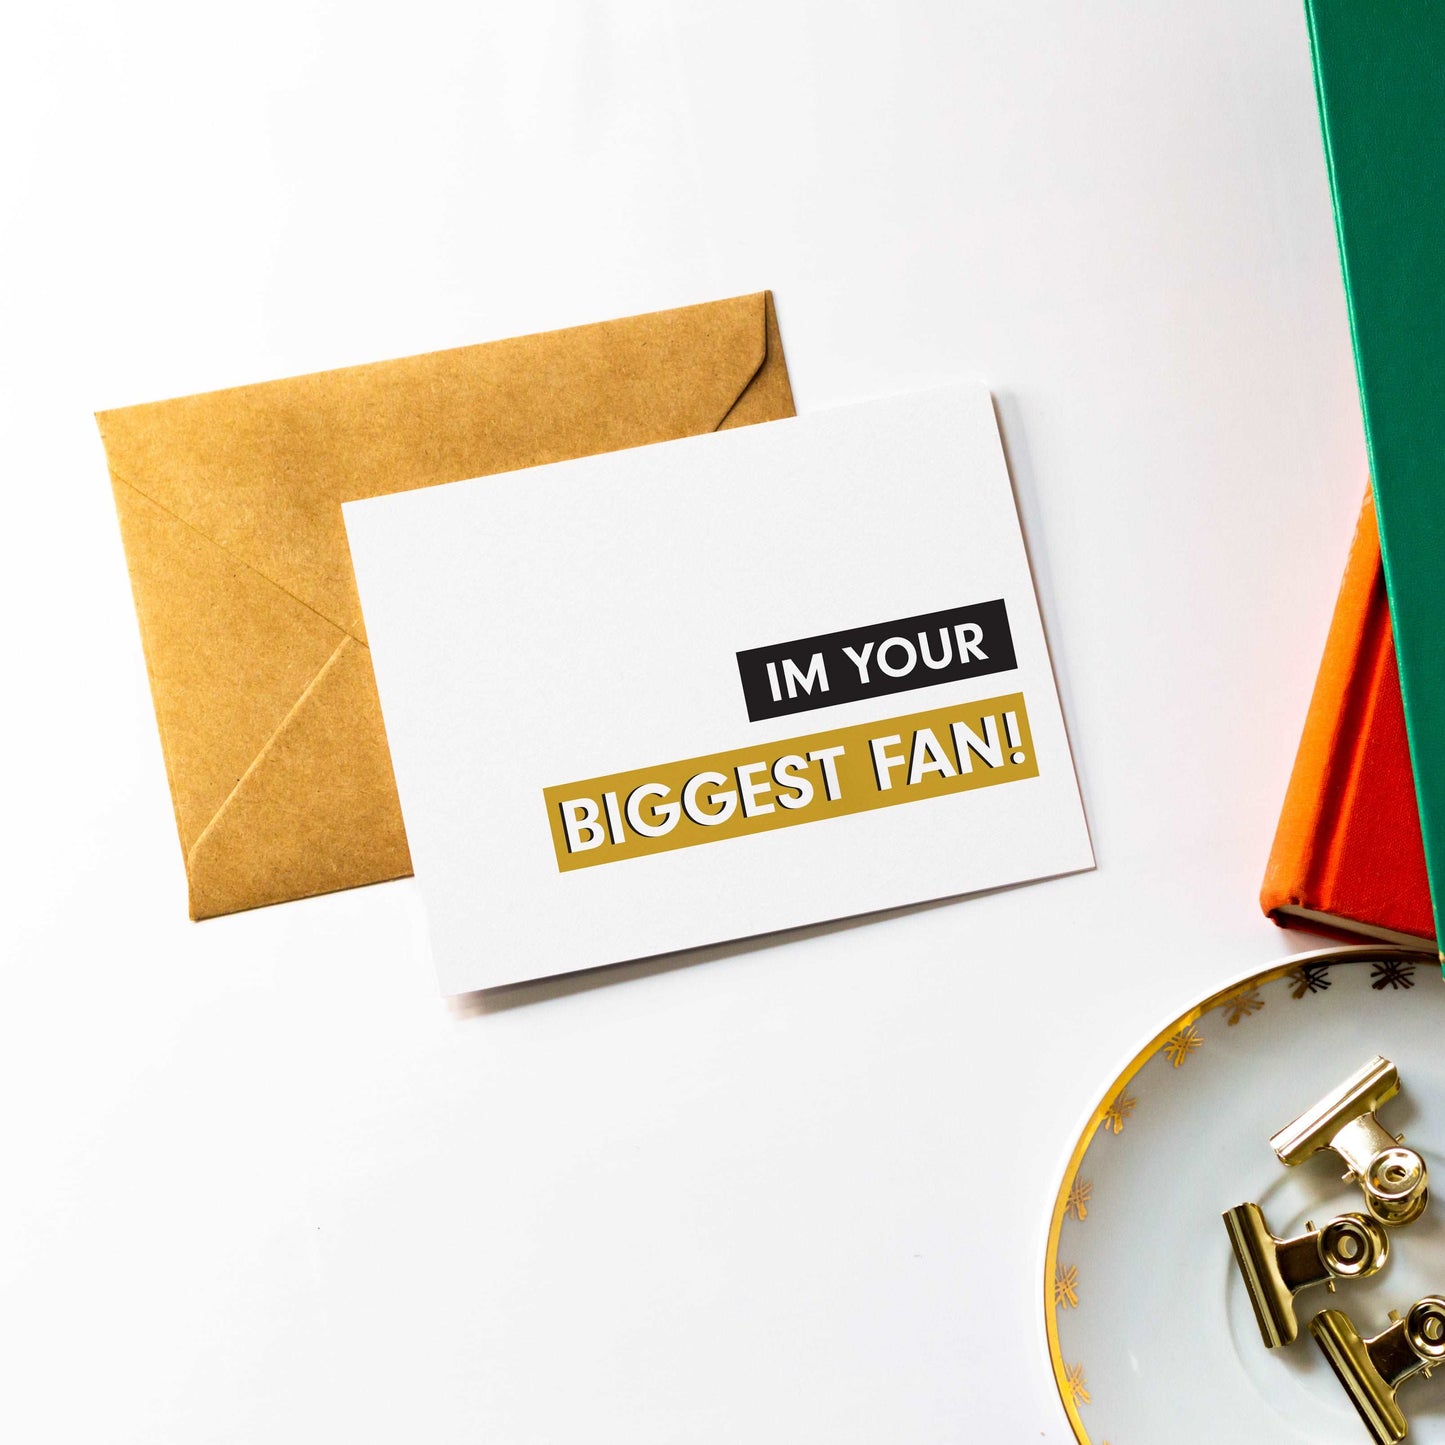 I'm Your Biggest Fan - Encouragement Congratulations Greeting Card with Envelope